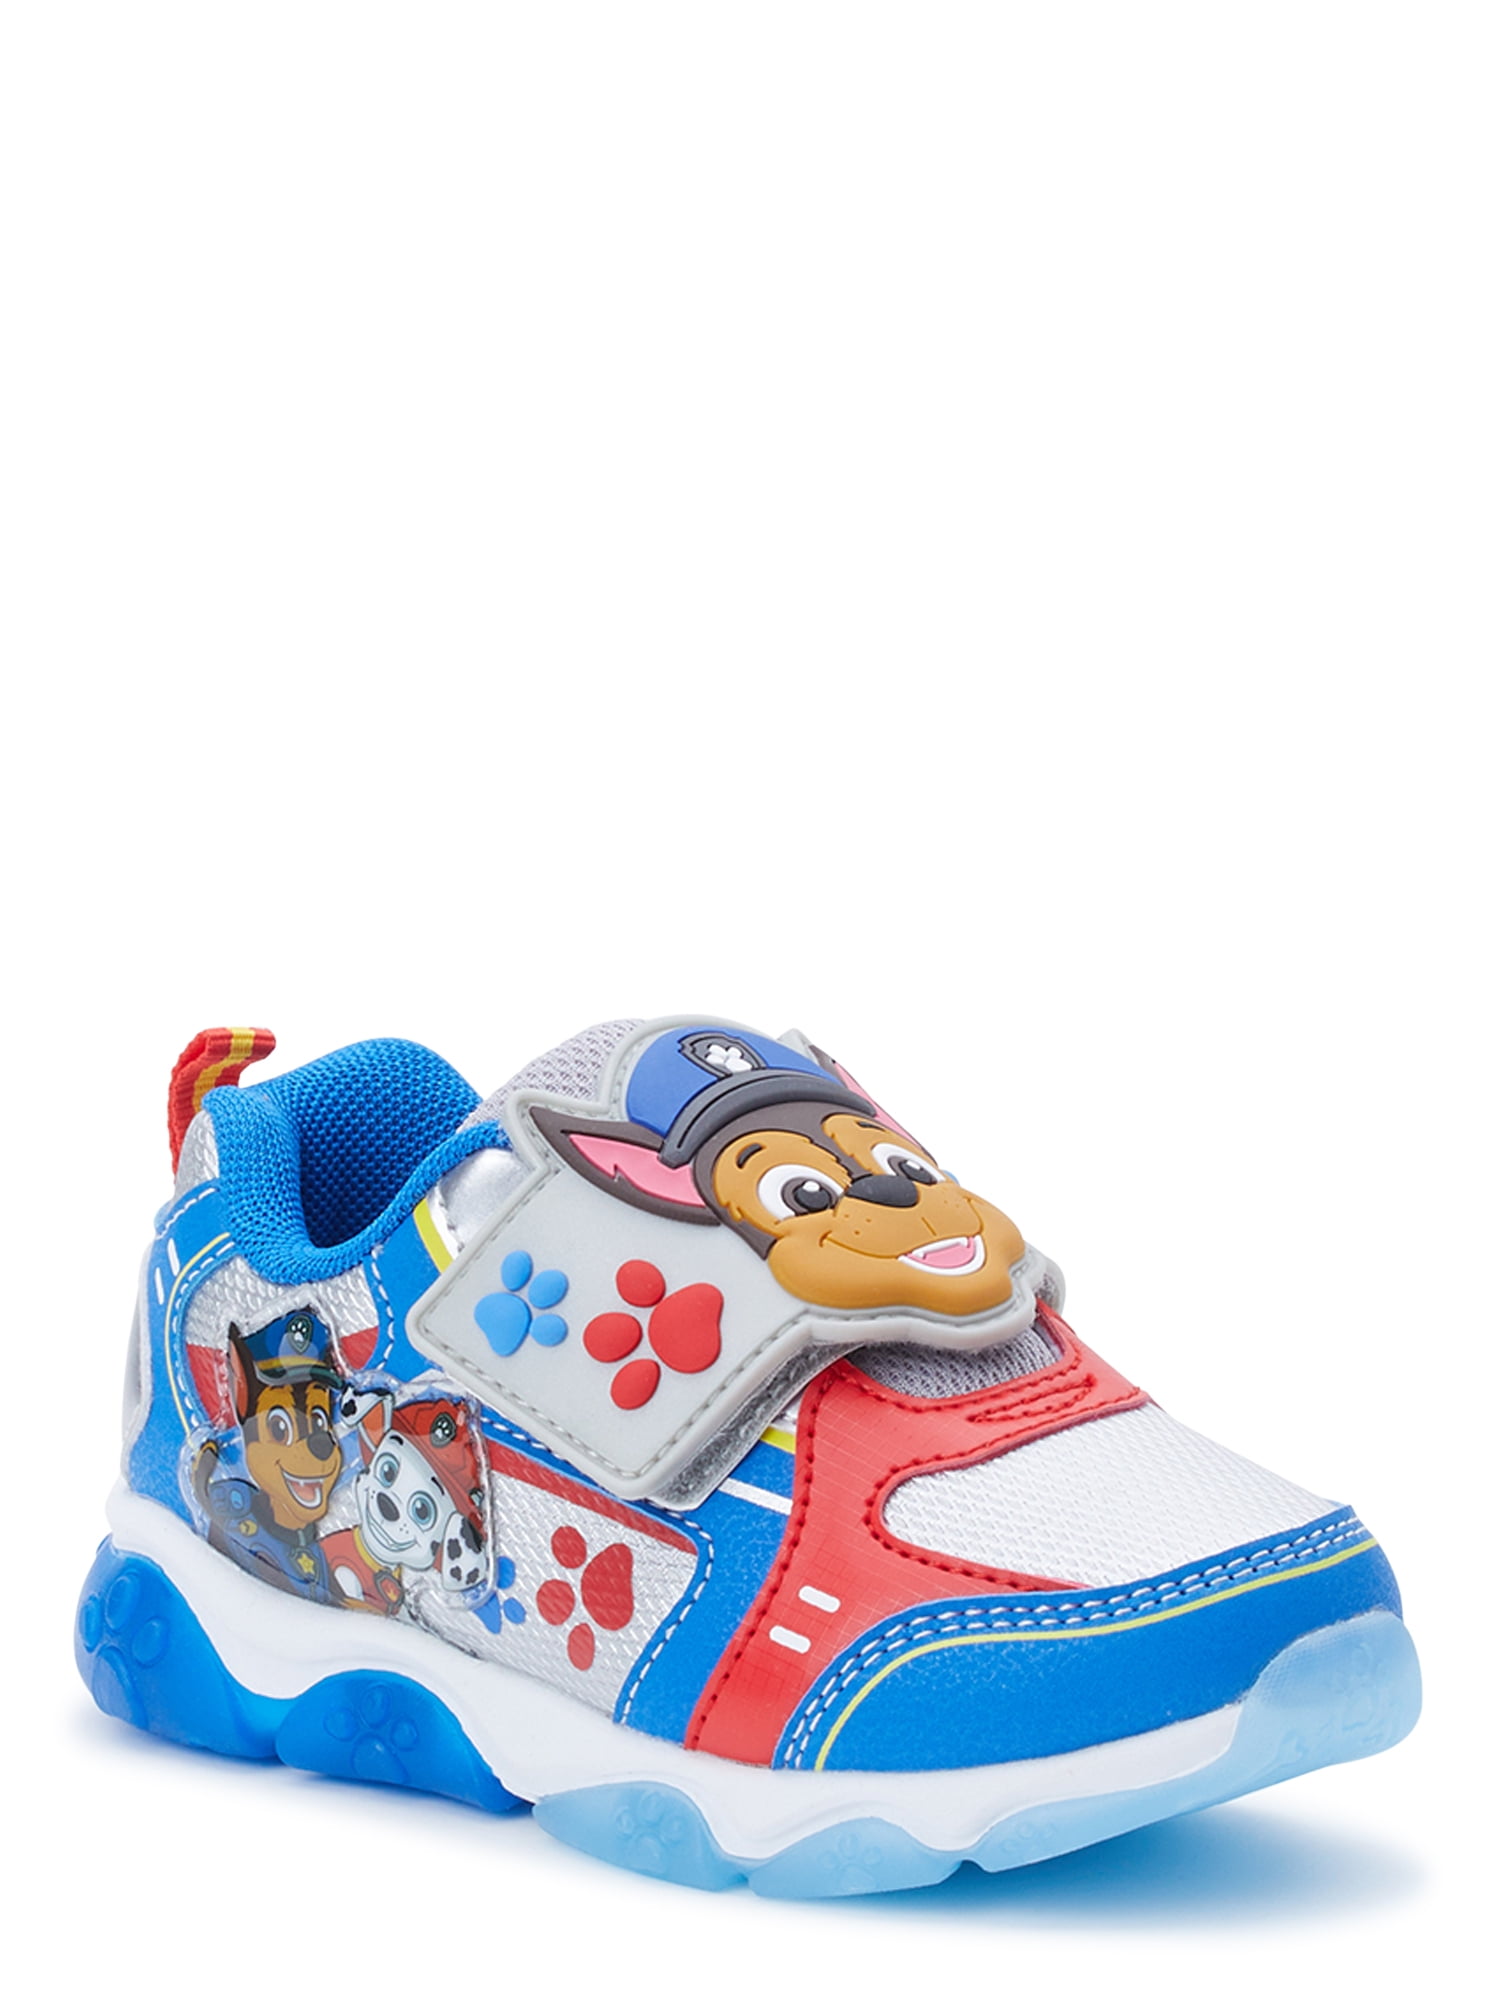 Toddler Boys Paw Patrol Athletic Sneaker with Lights Sizes 7-12 